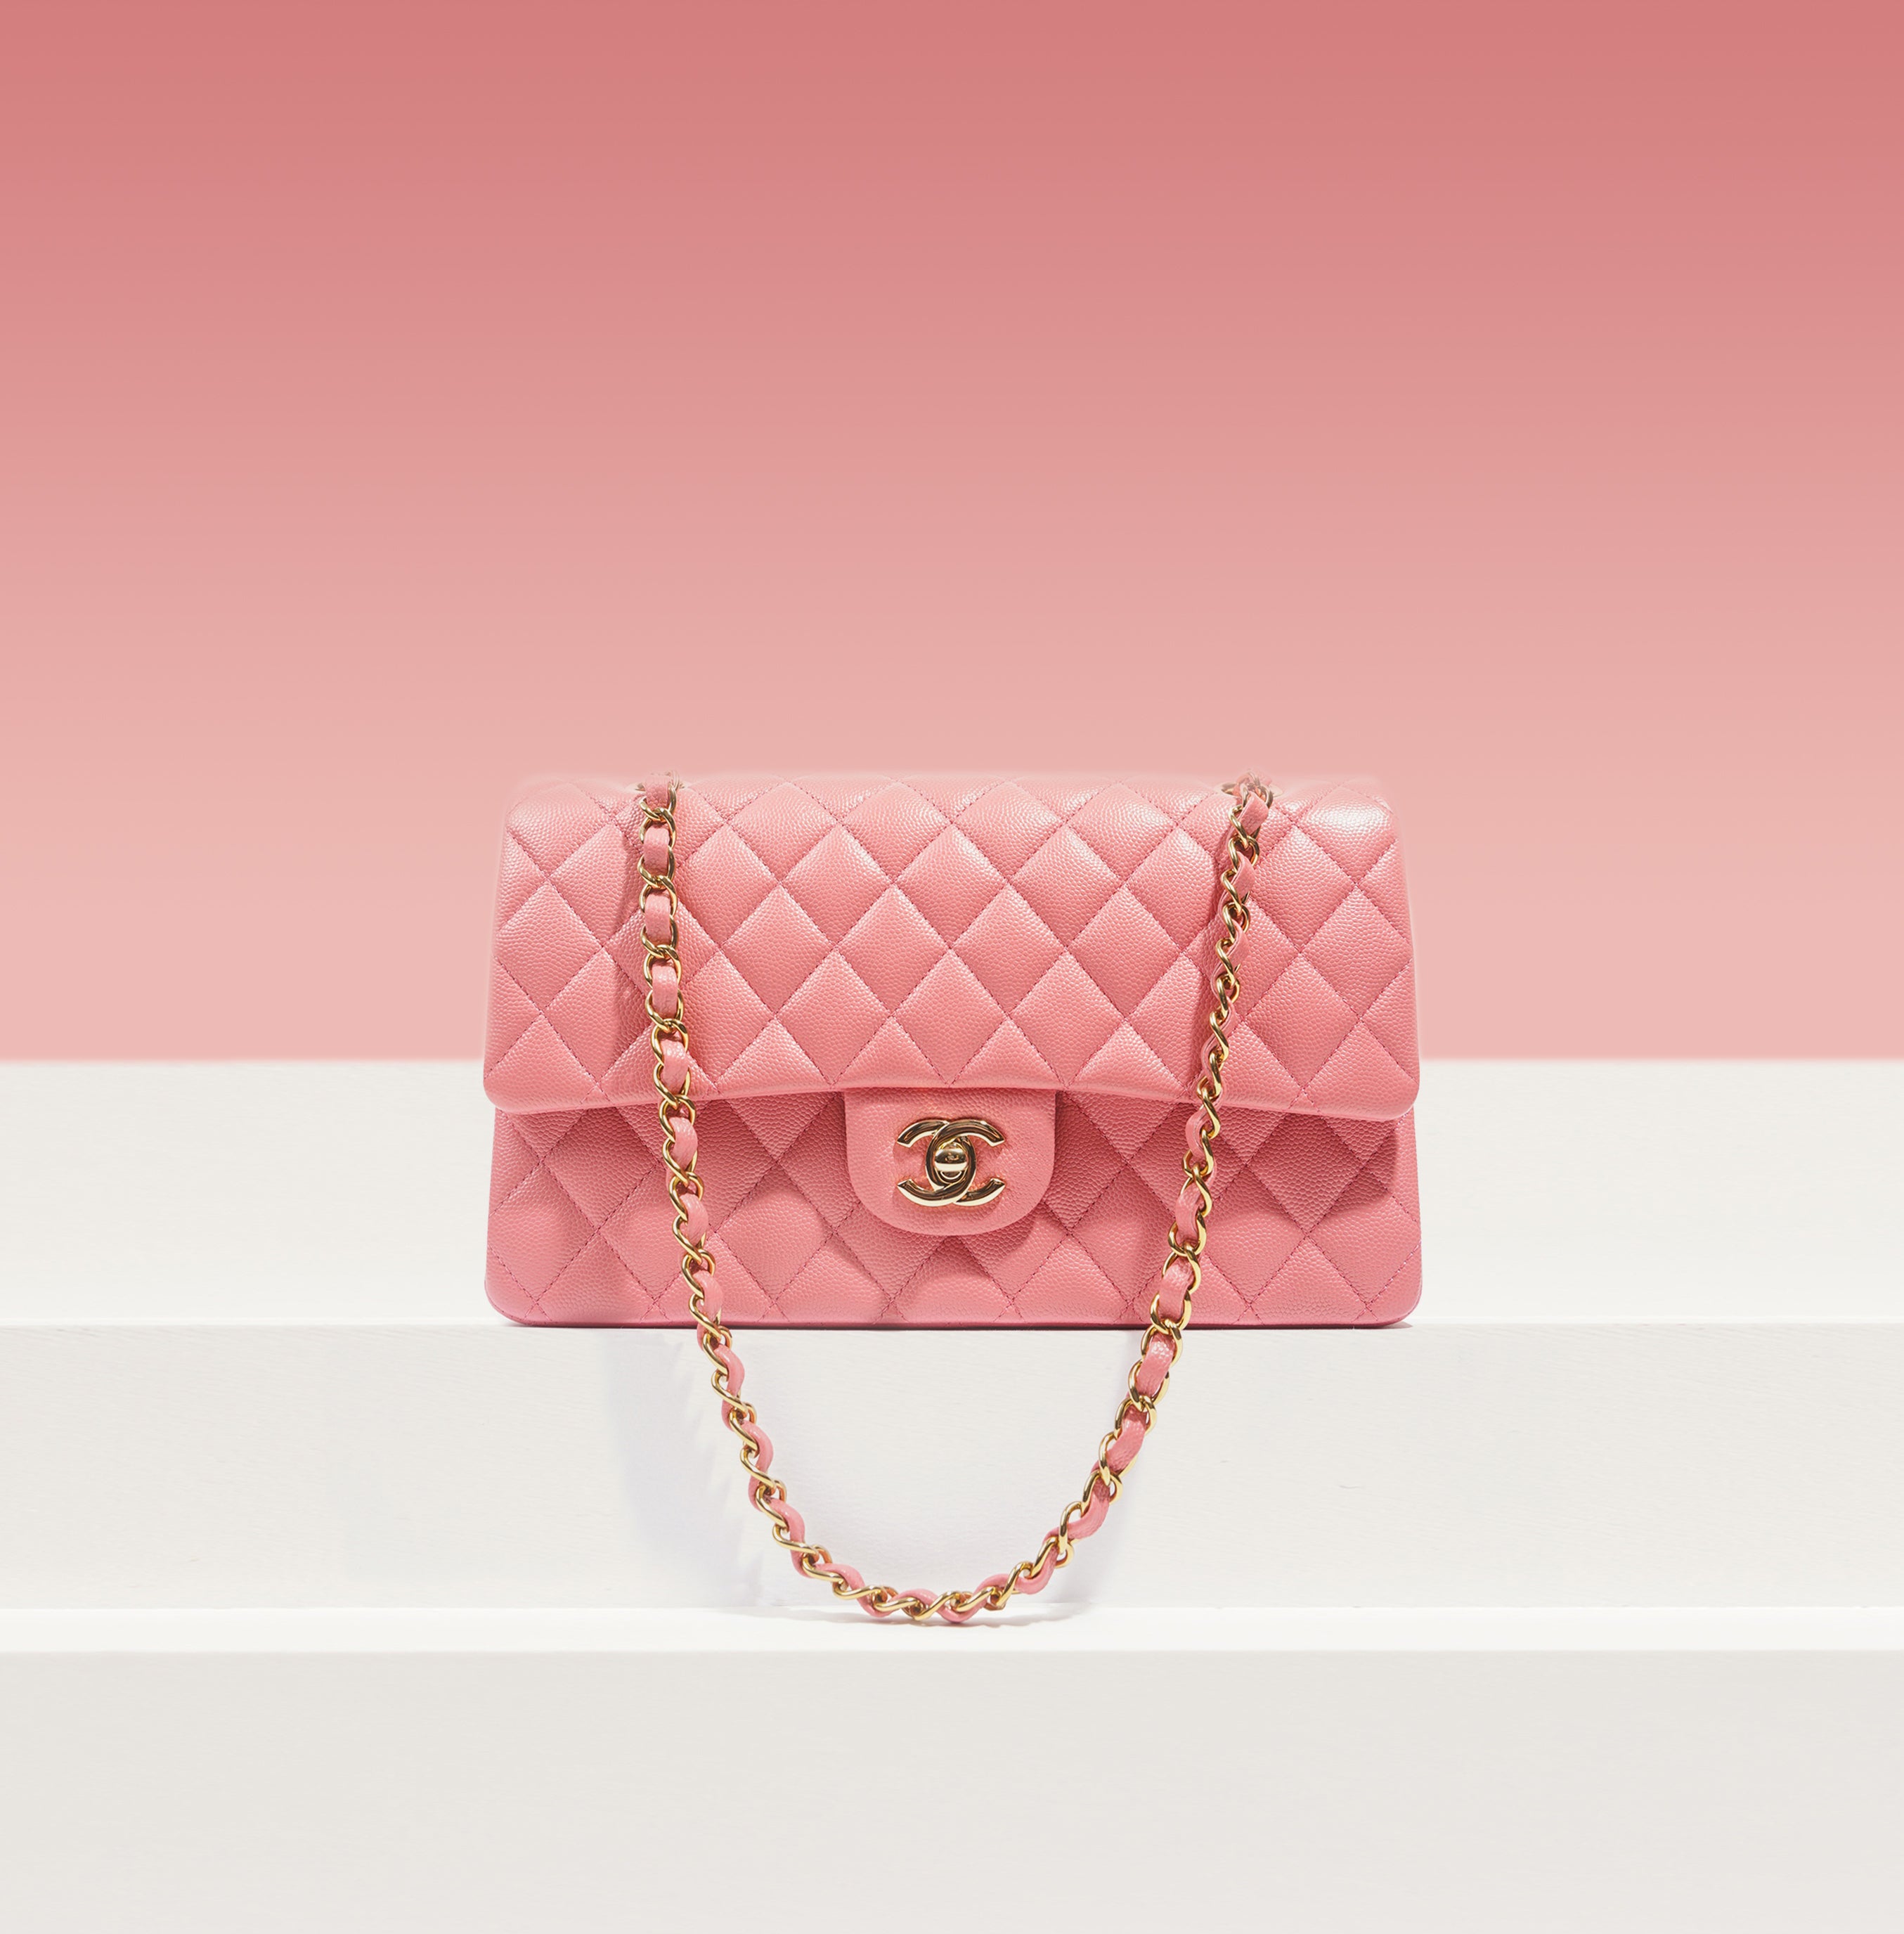 Chanel Prices Continue to Rise in 2023